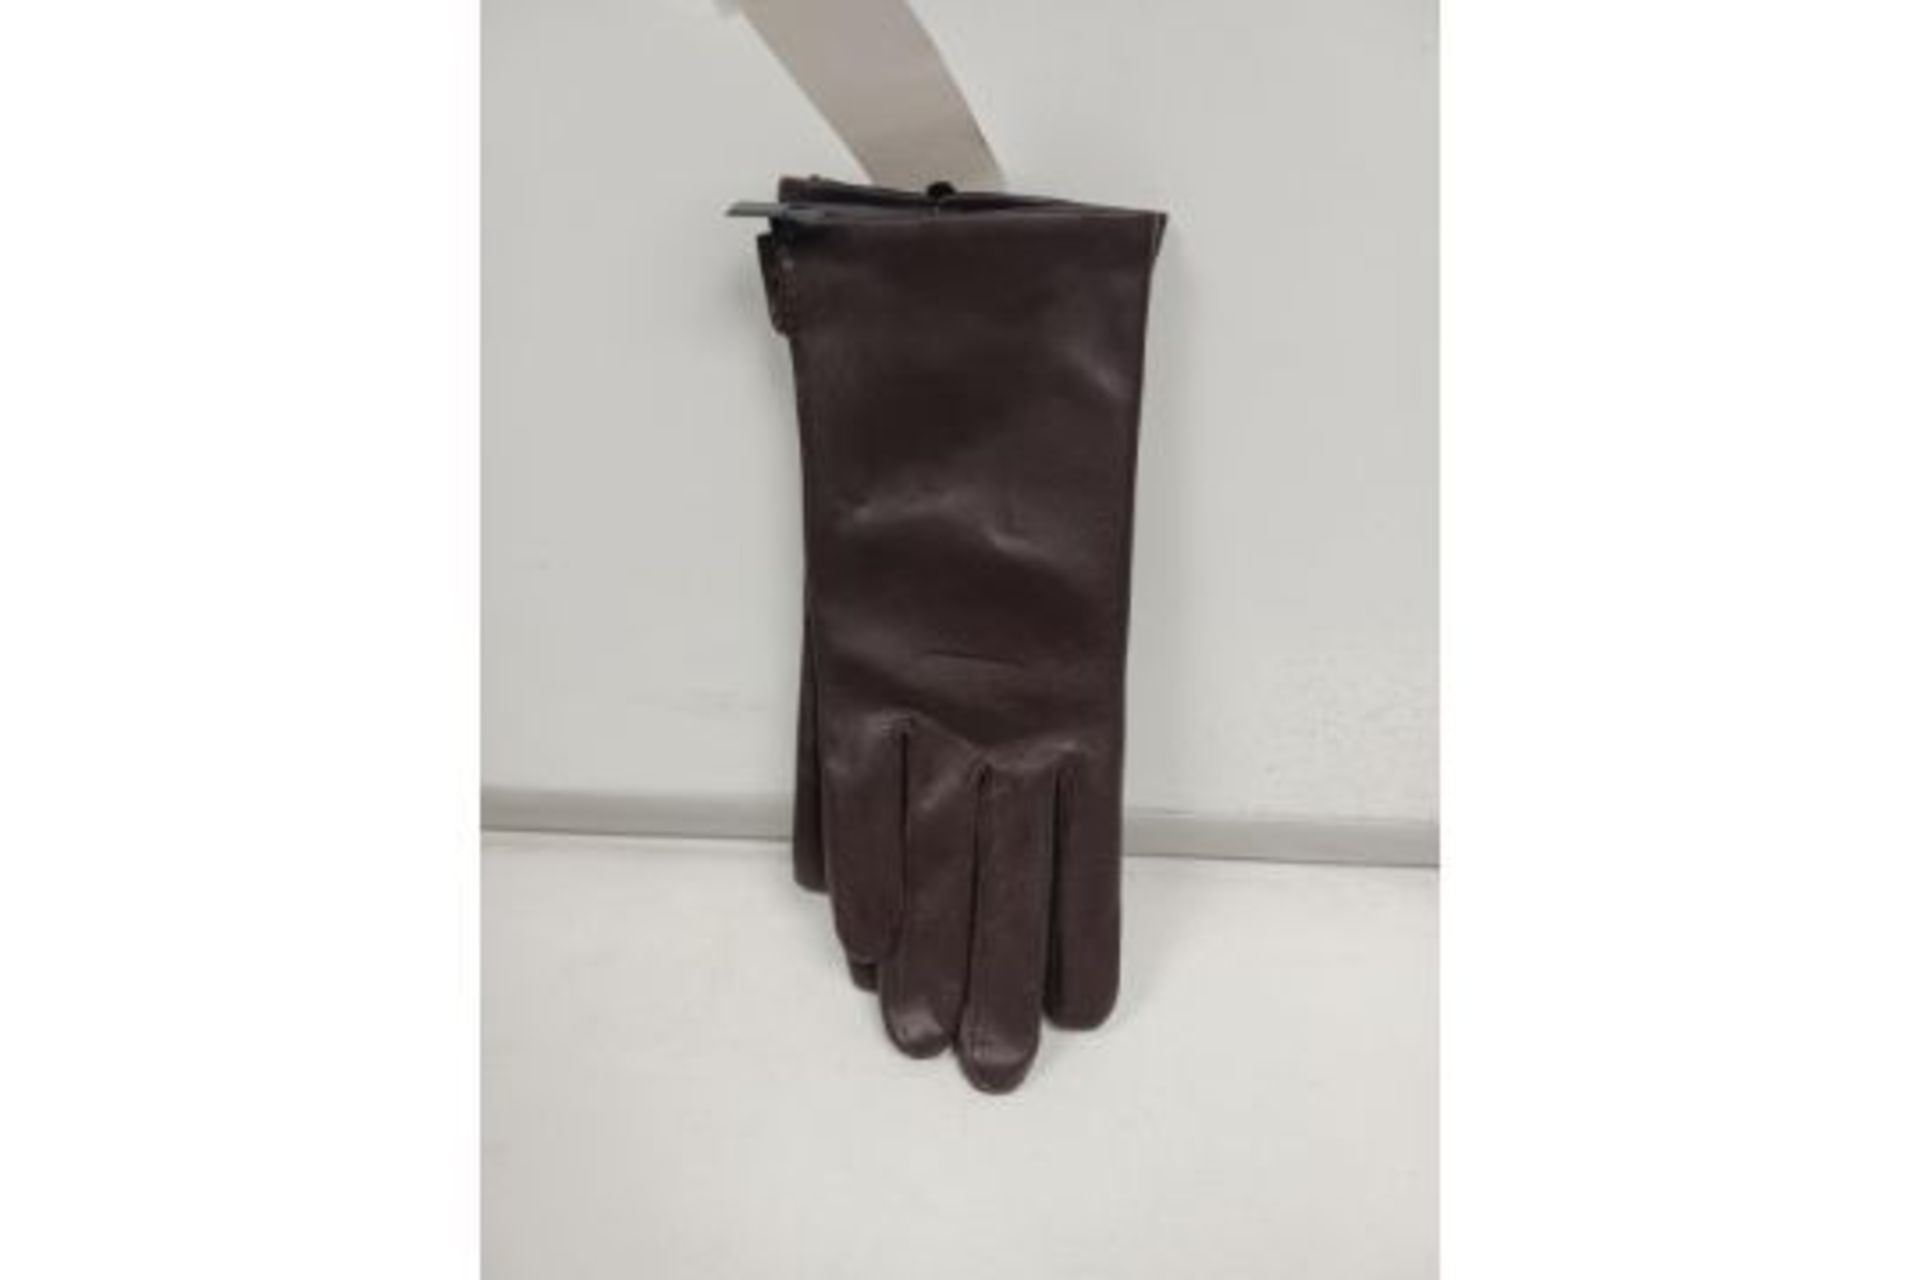 20 X NEW PACKAGED PAIRS OF TOTES ISOTONER LEATHER GLOVES - CHOCOLATE. PRICE MARKED AT £20 PER